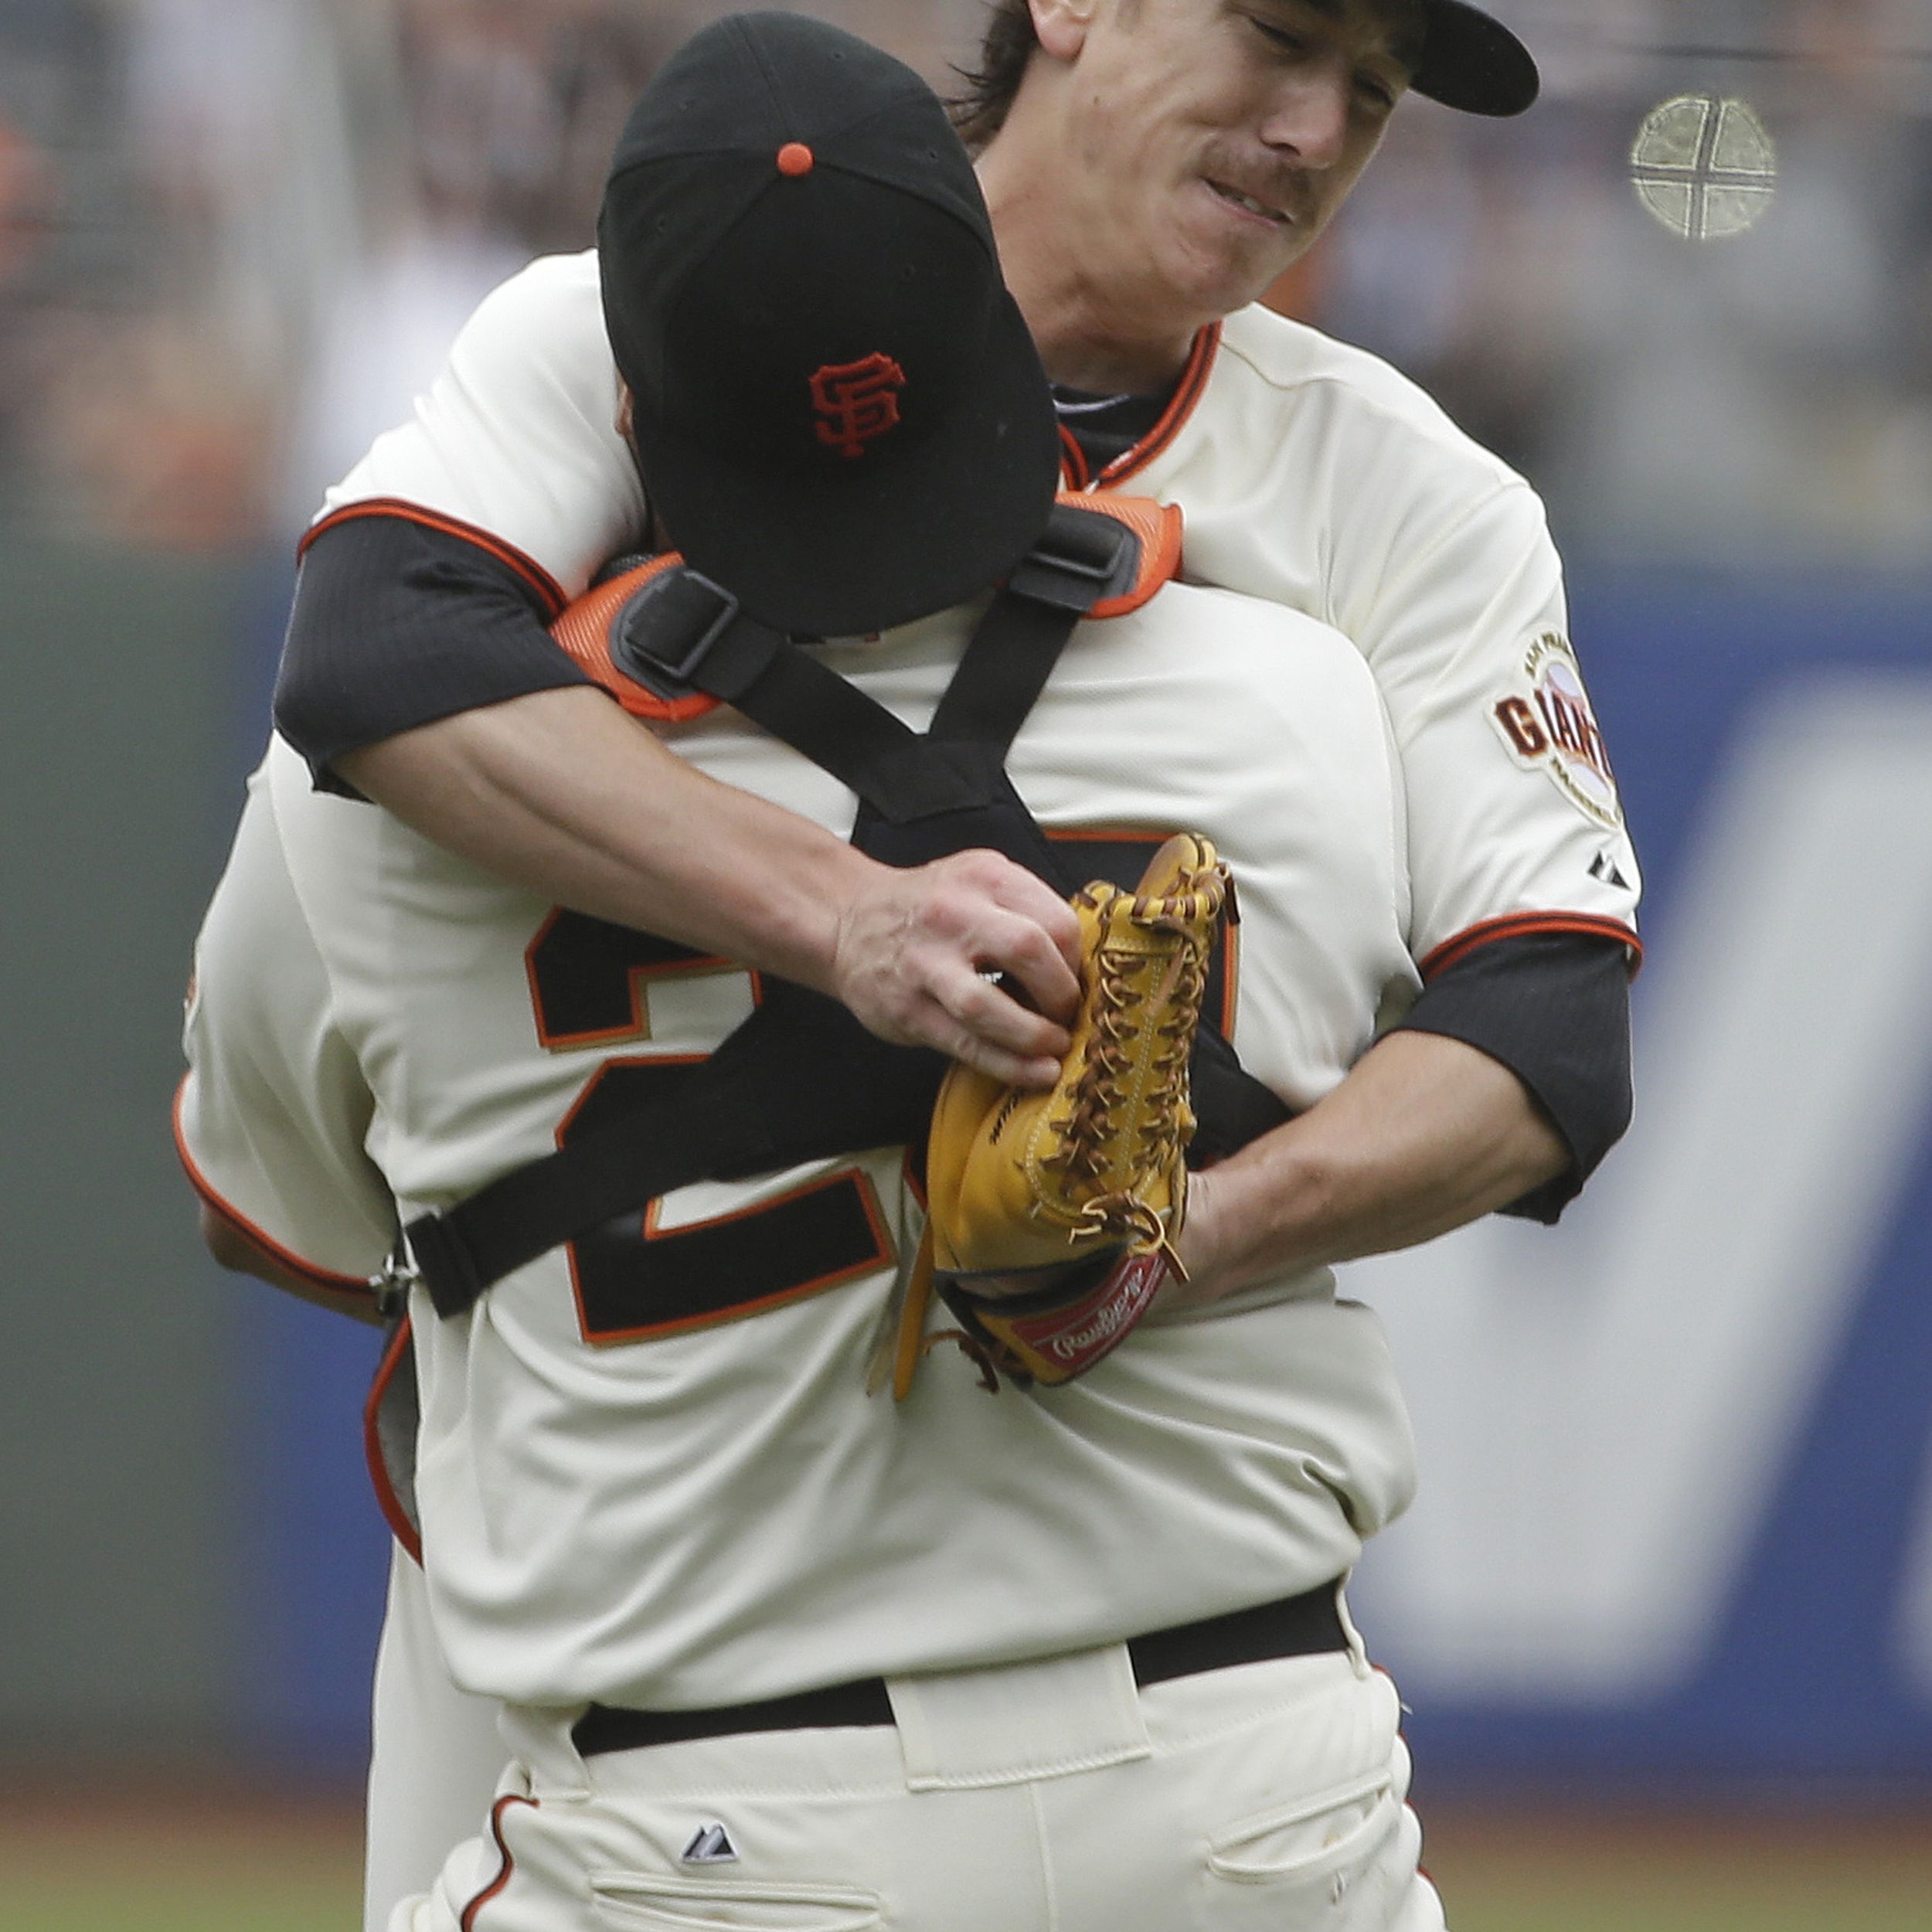 Former Giants ace Tim Lincecum turns to dad, lets hair grow out